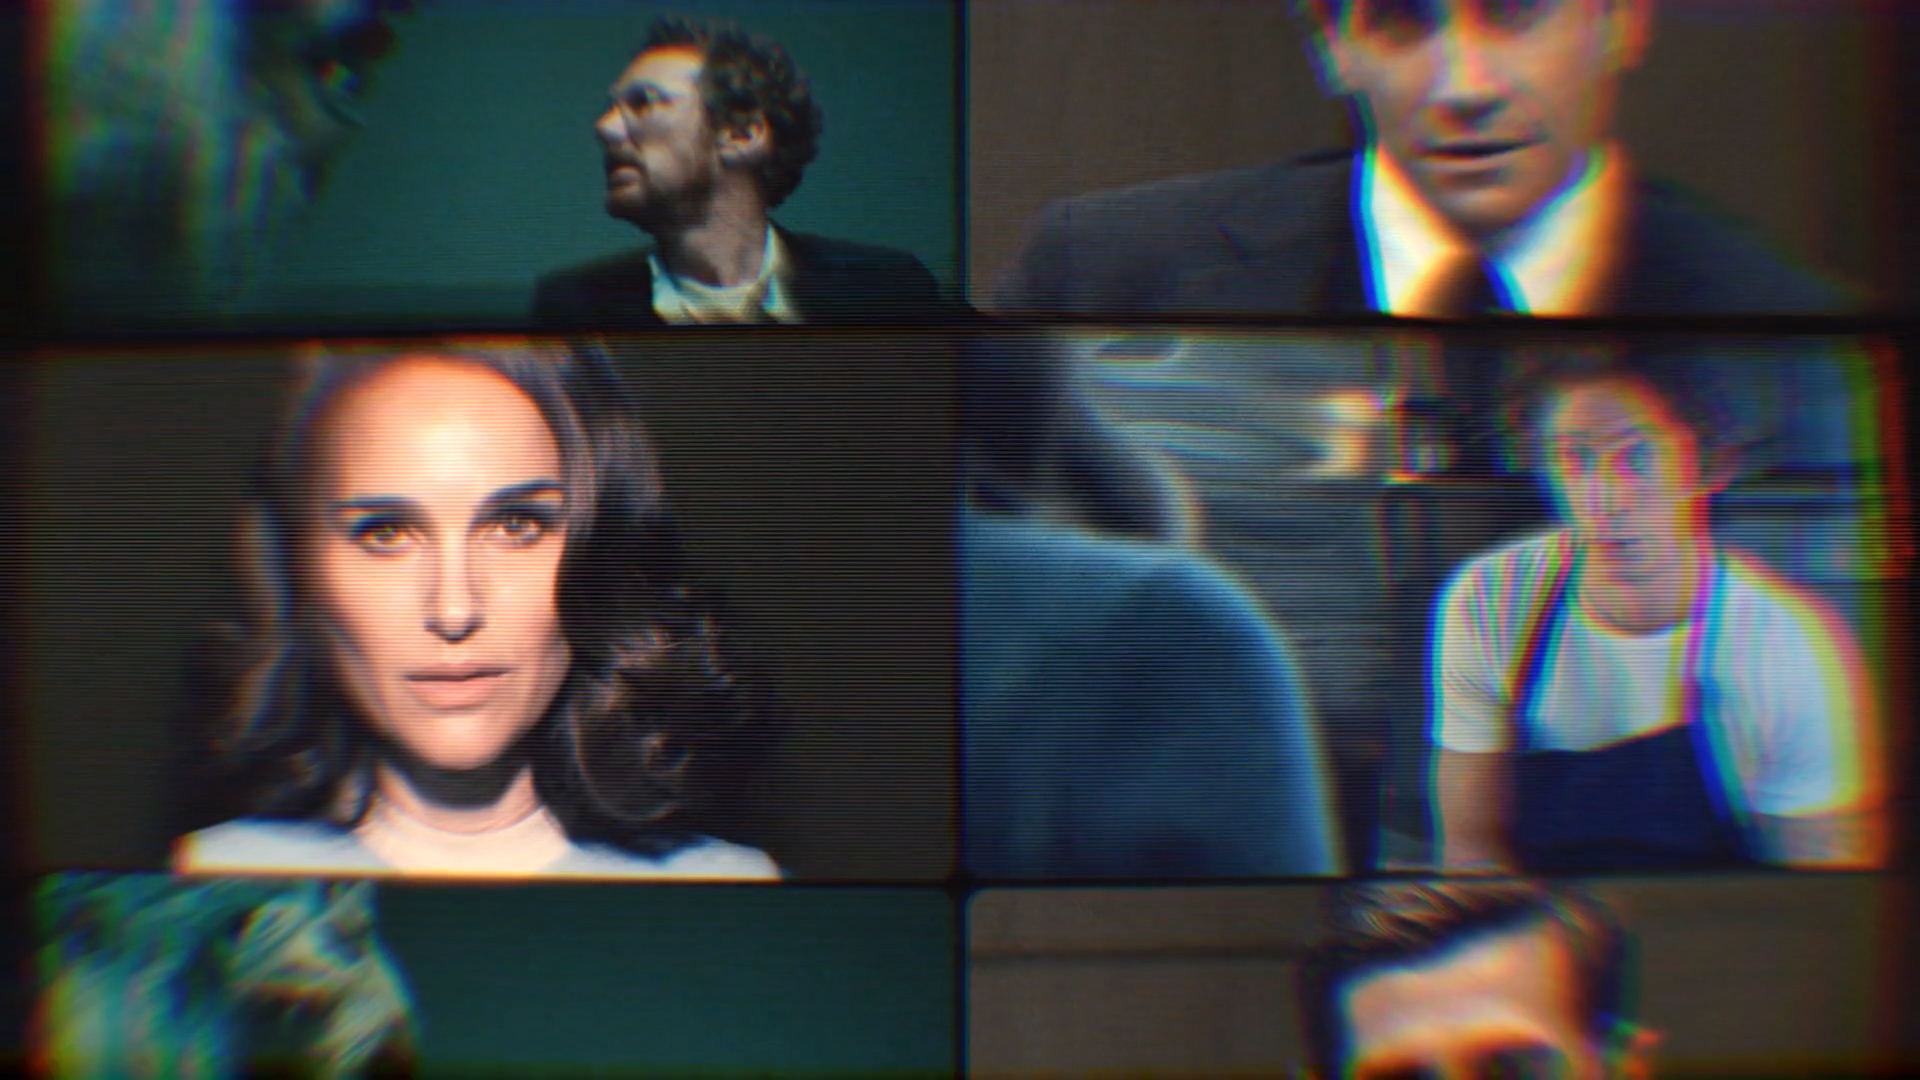 a video collage showing Natalie Portman from the show "Lady in The River" and Jeremy Allen White from "The Bear"